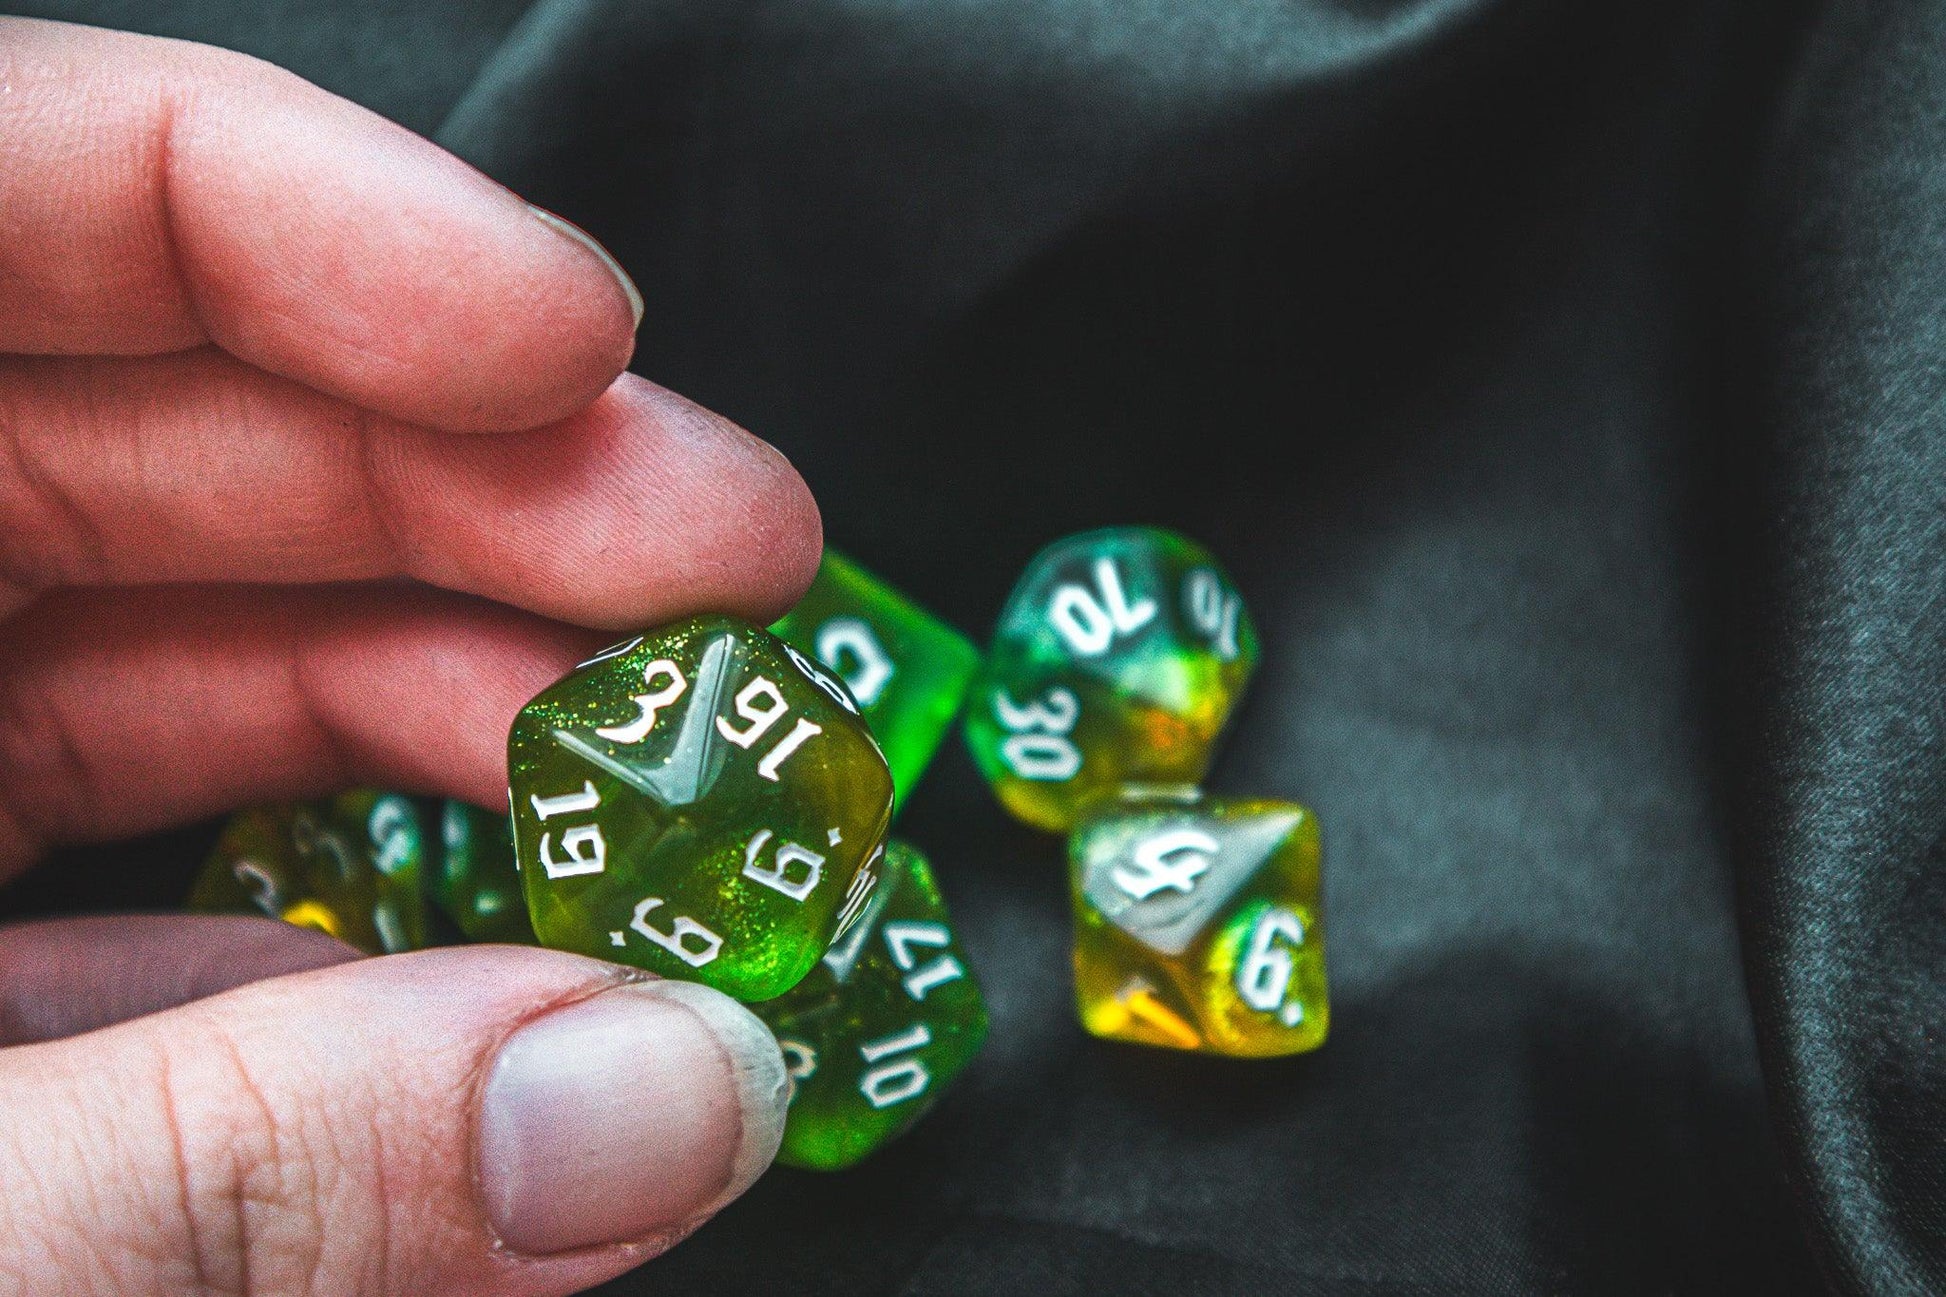 Natures calling dice set - The Flaming Feather & Flaming Filament